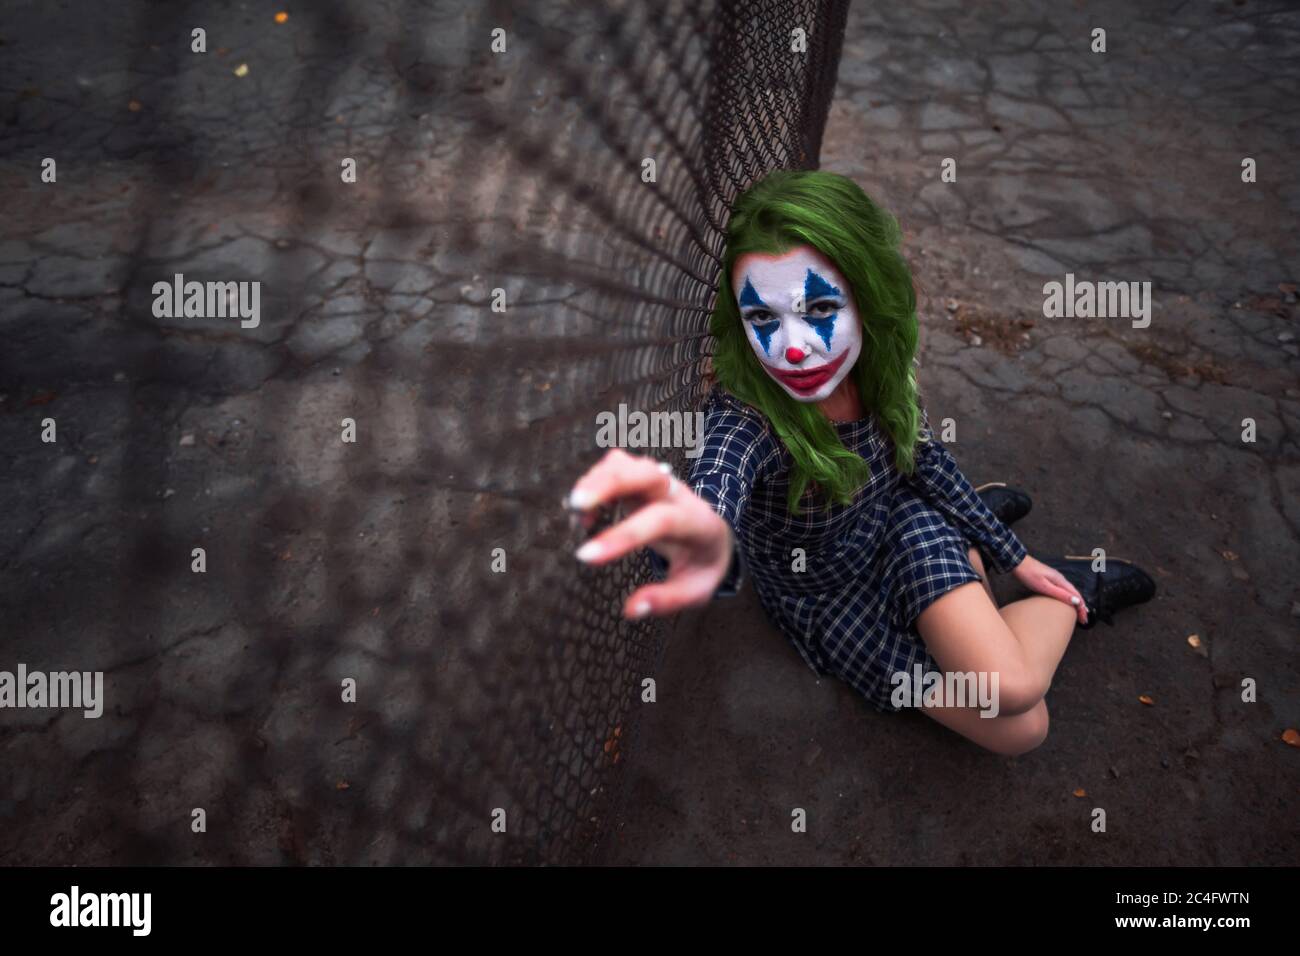 Greenhaired girl in chekered dress with joker makeup sitting near wire mesh fence on the ground. Wide shot. Stock Photo